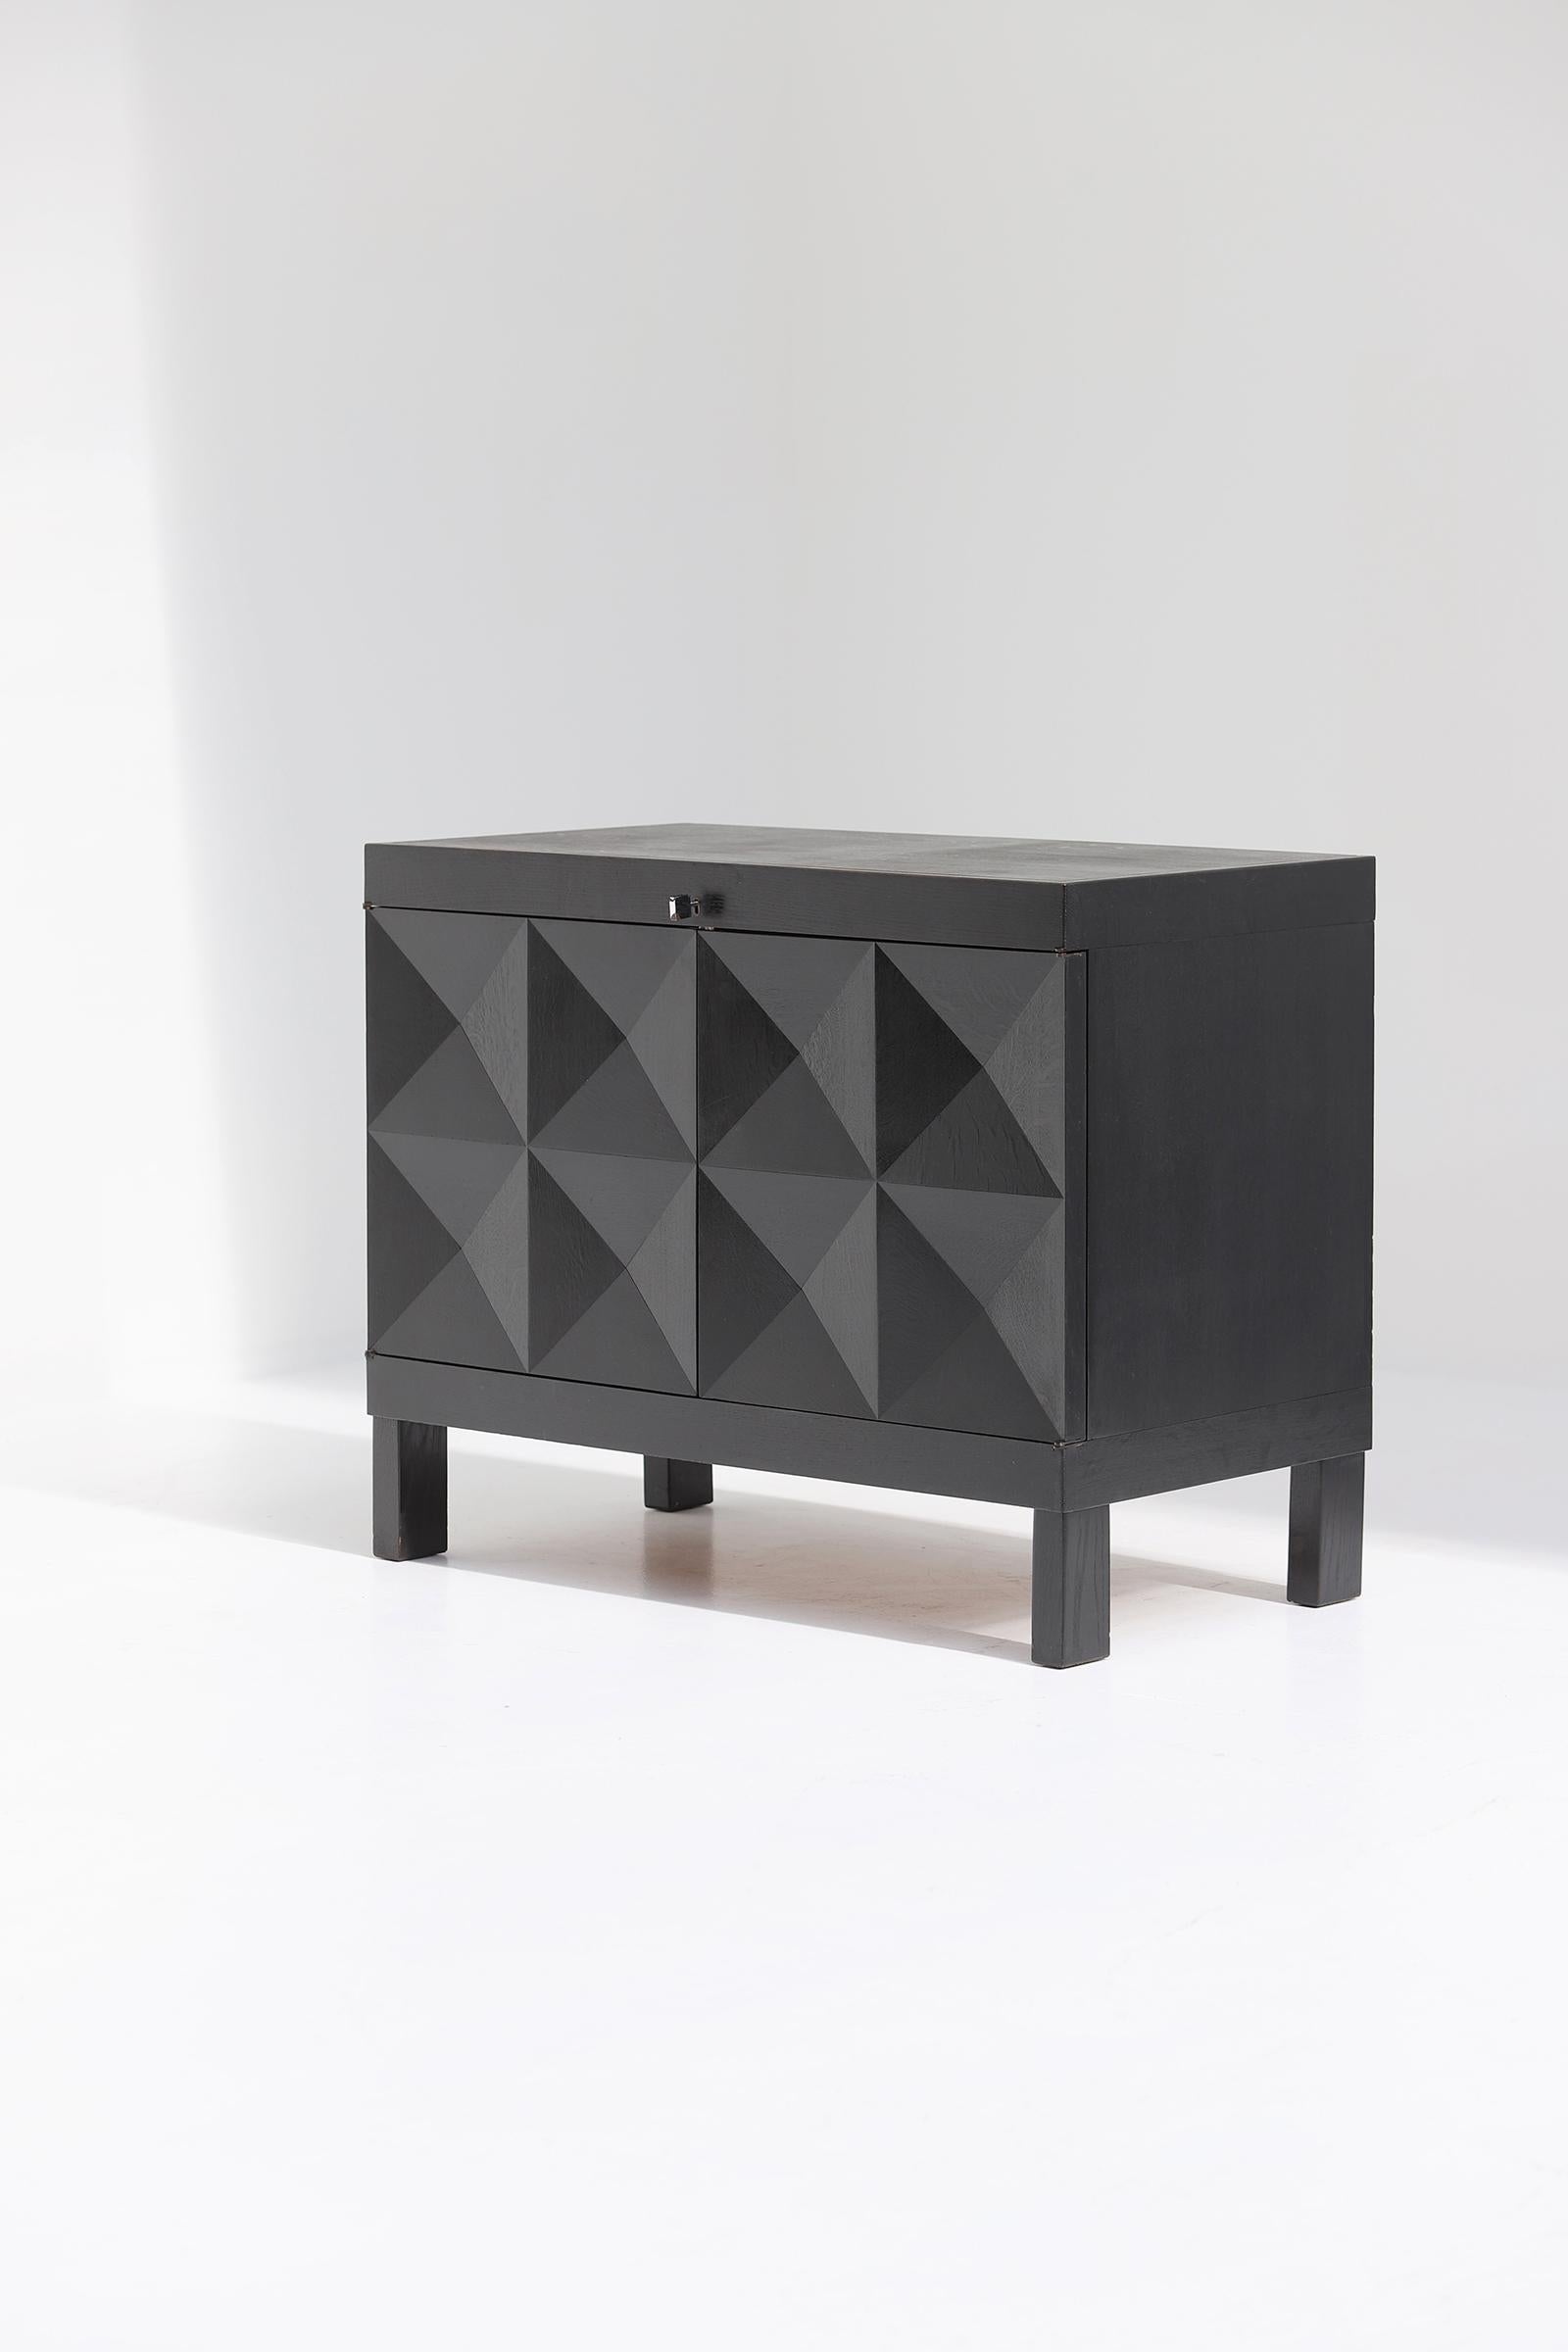 Brutalist black cabinet with graphic patterned doors for MI, Belgium 1969 For Sale 7